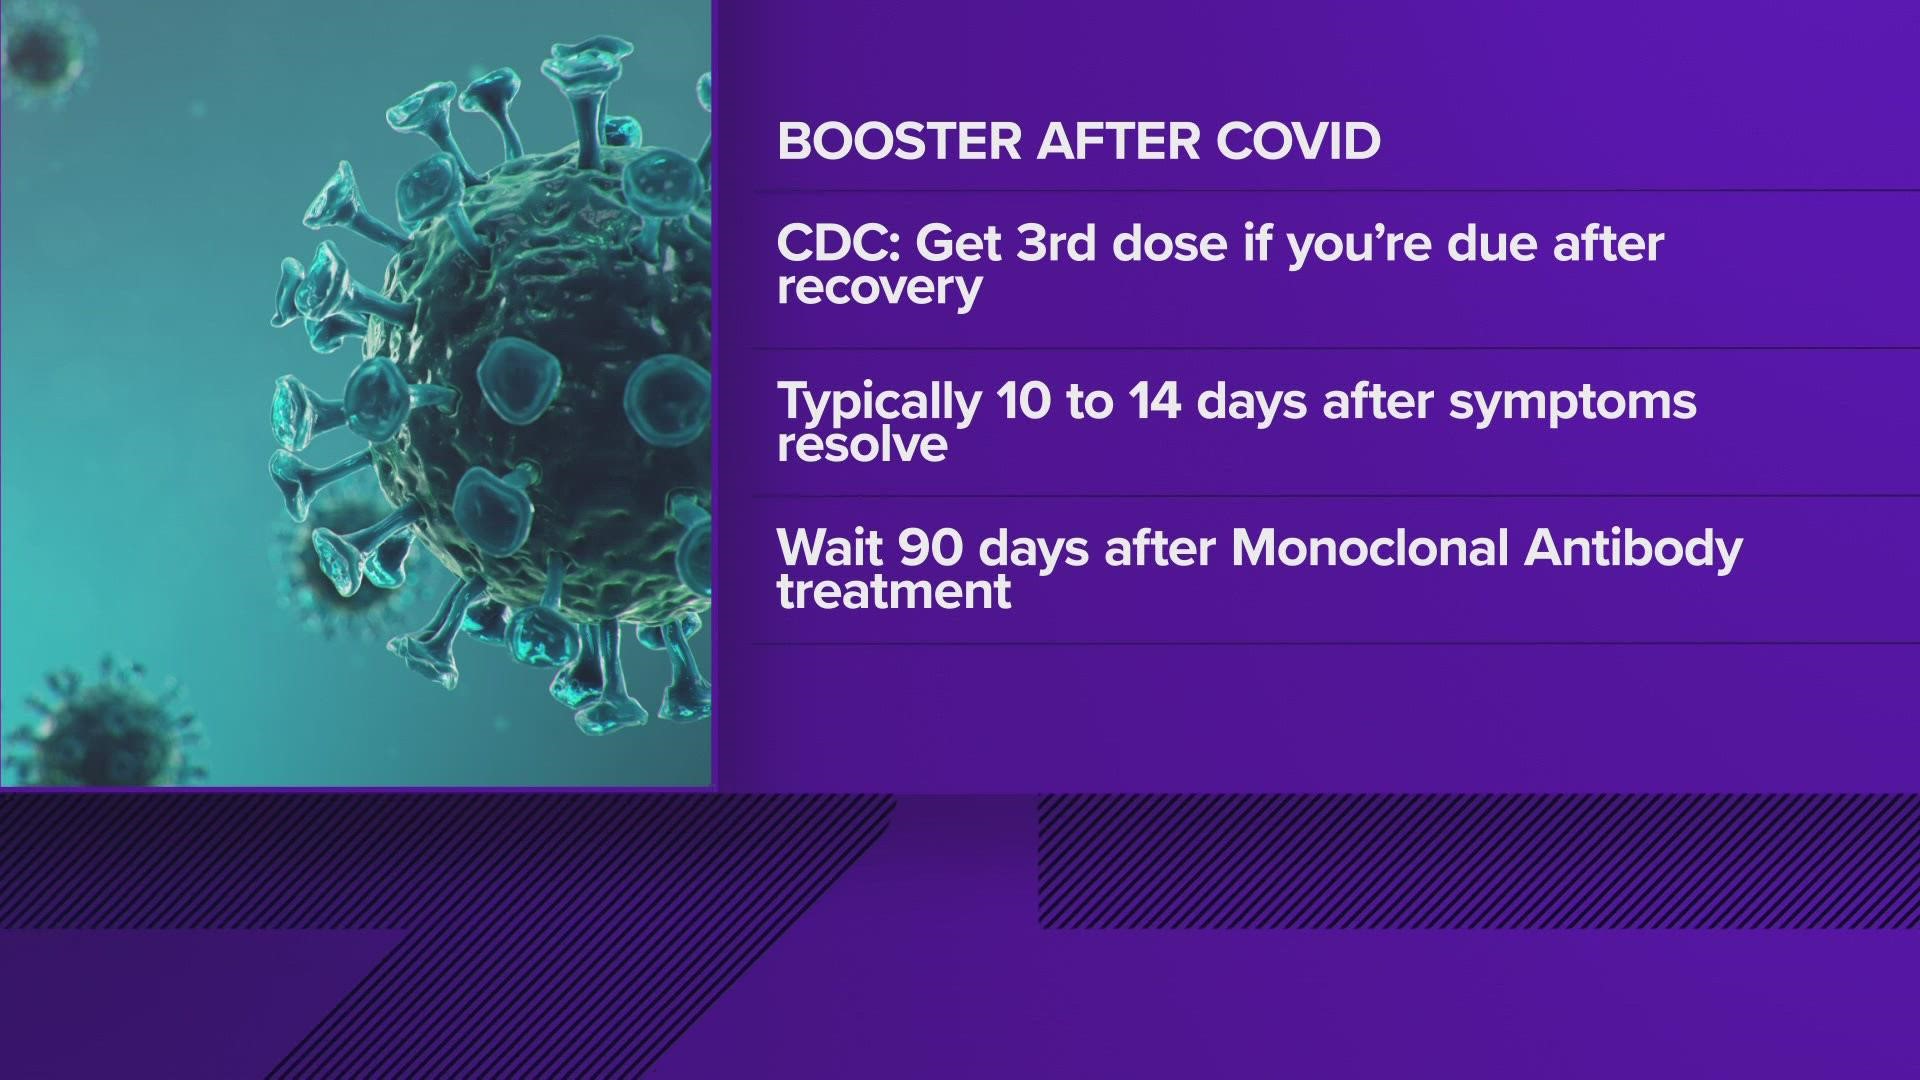 Should I get a booster if I recently had COVID-19? Yes, but maybe not right away.